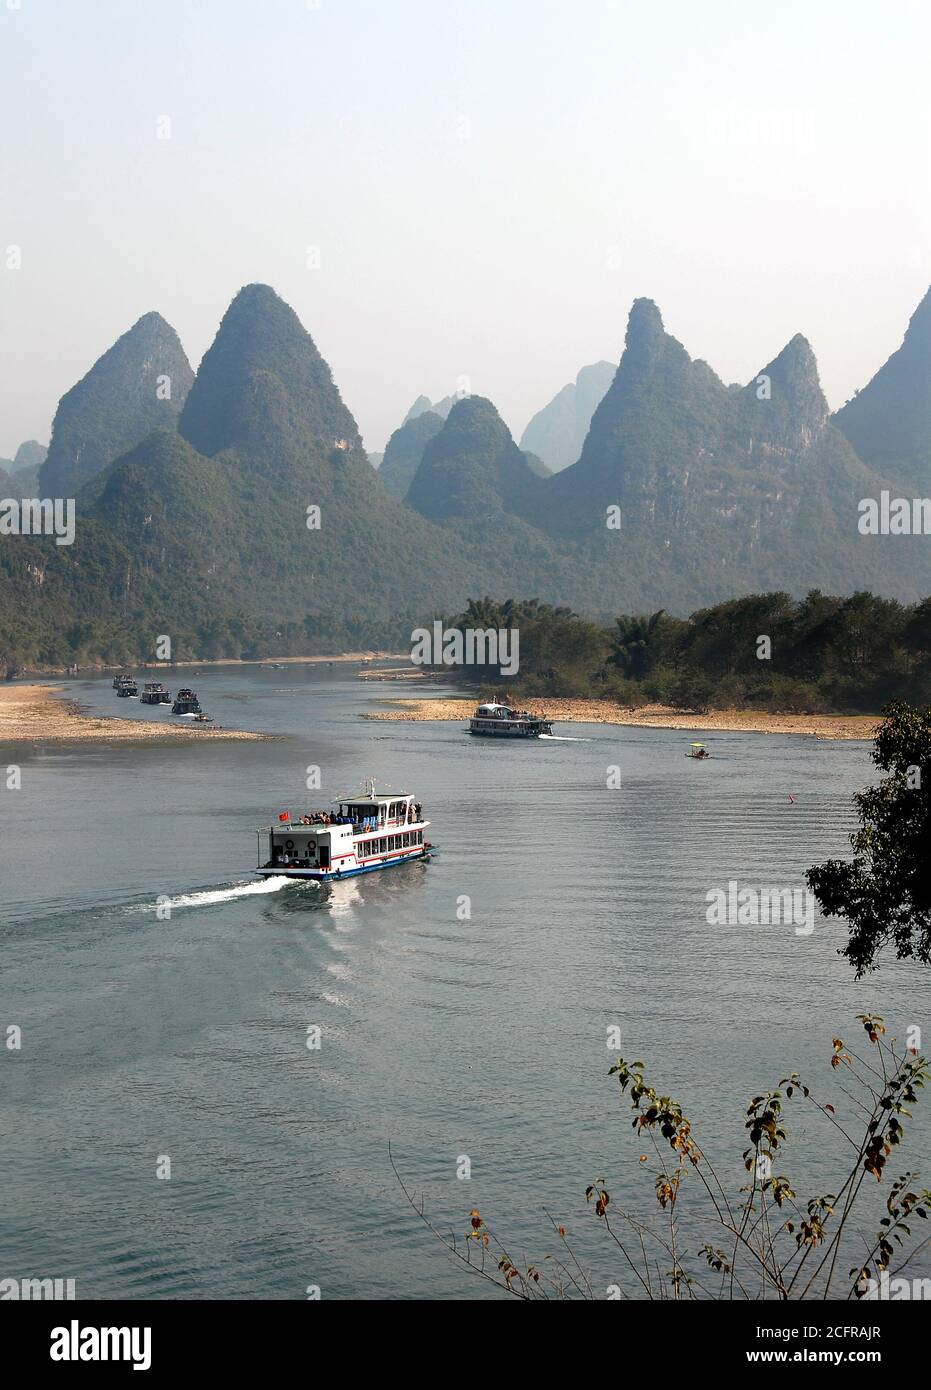 Boats on the Li River between Guilin and Yangshuo in Guangxi Province, China. Stock Photo